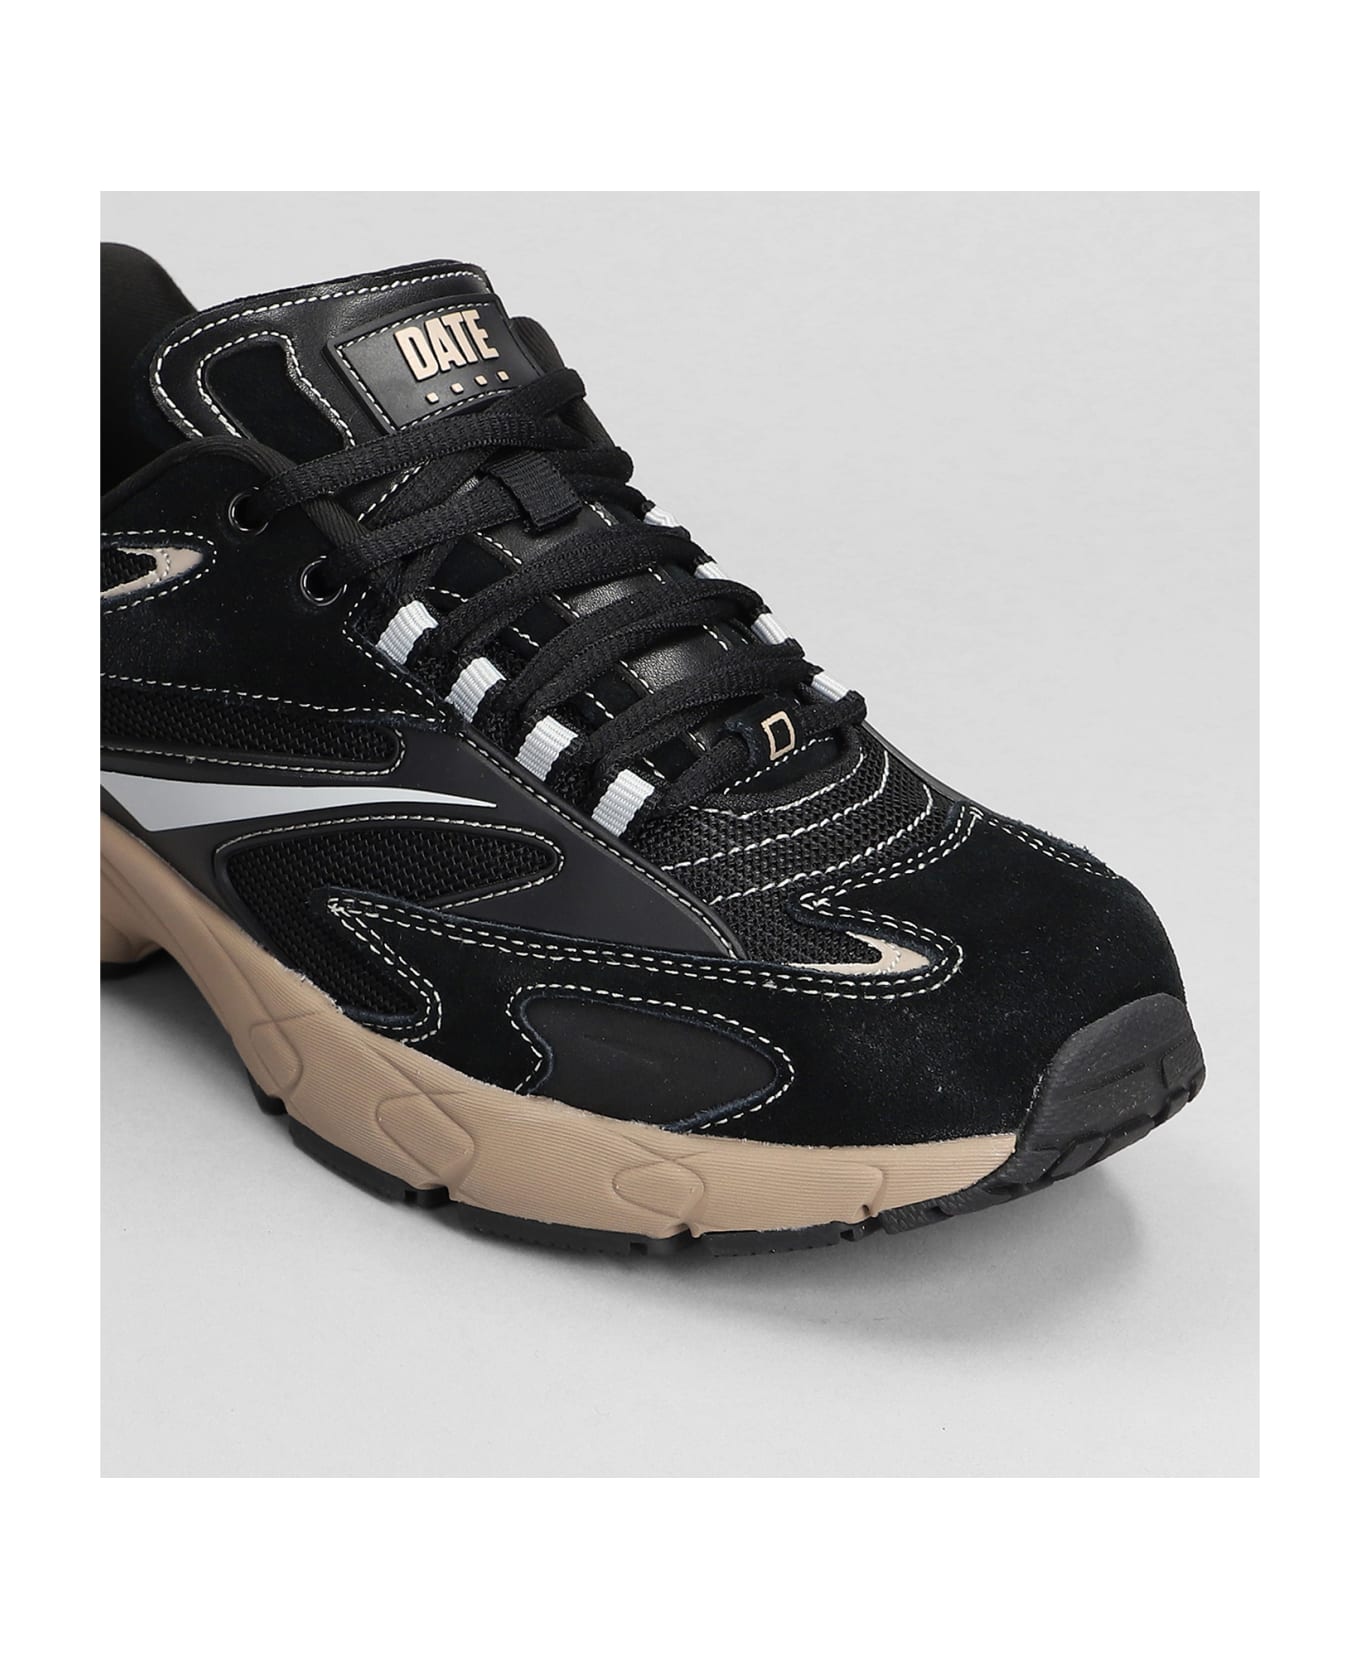 D.A.T.E. Sn 23 Collection Sneakers In Black Suede And Fabric - black